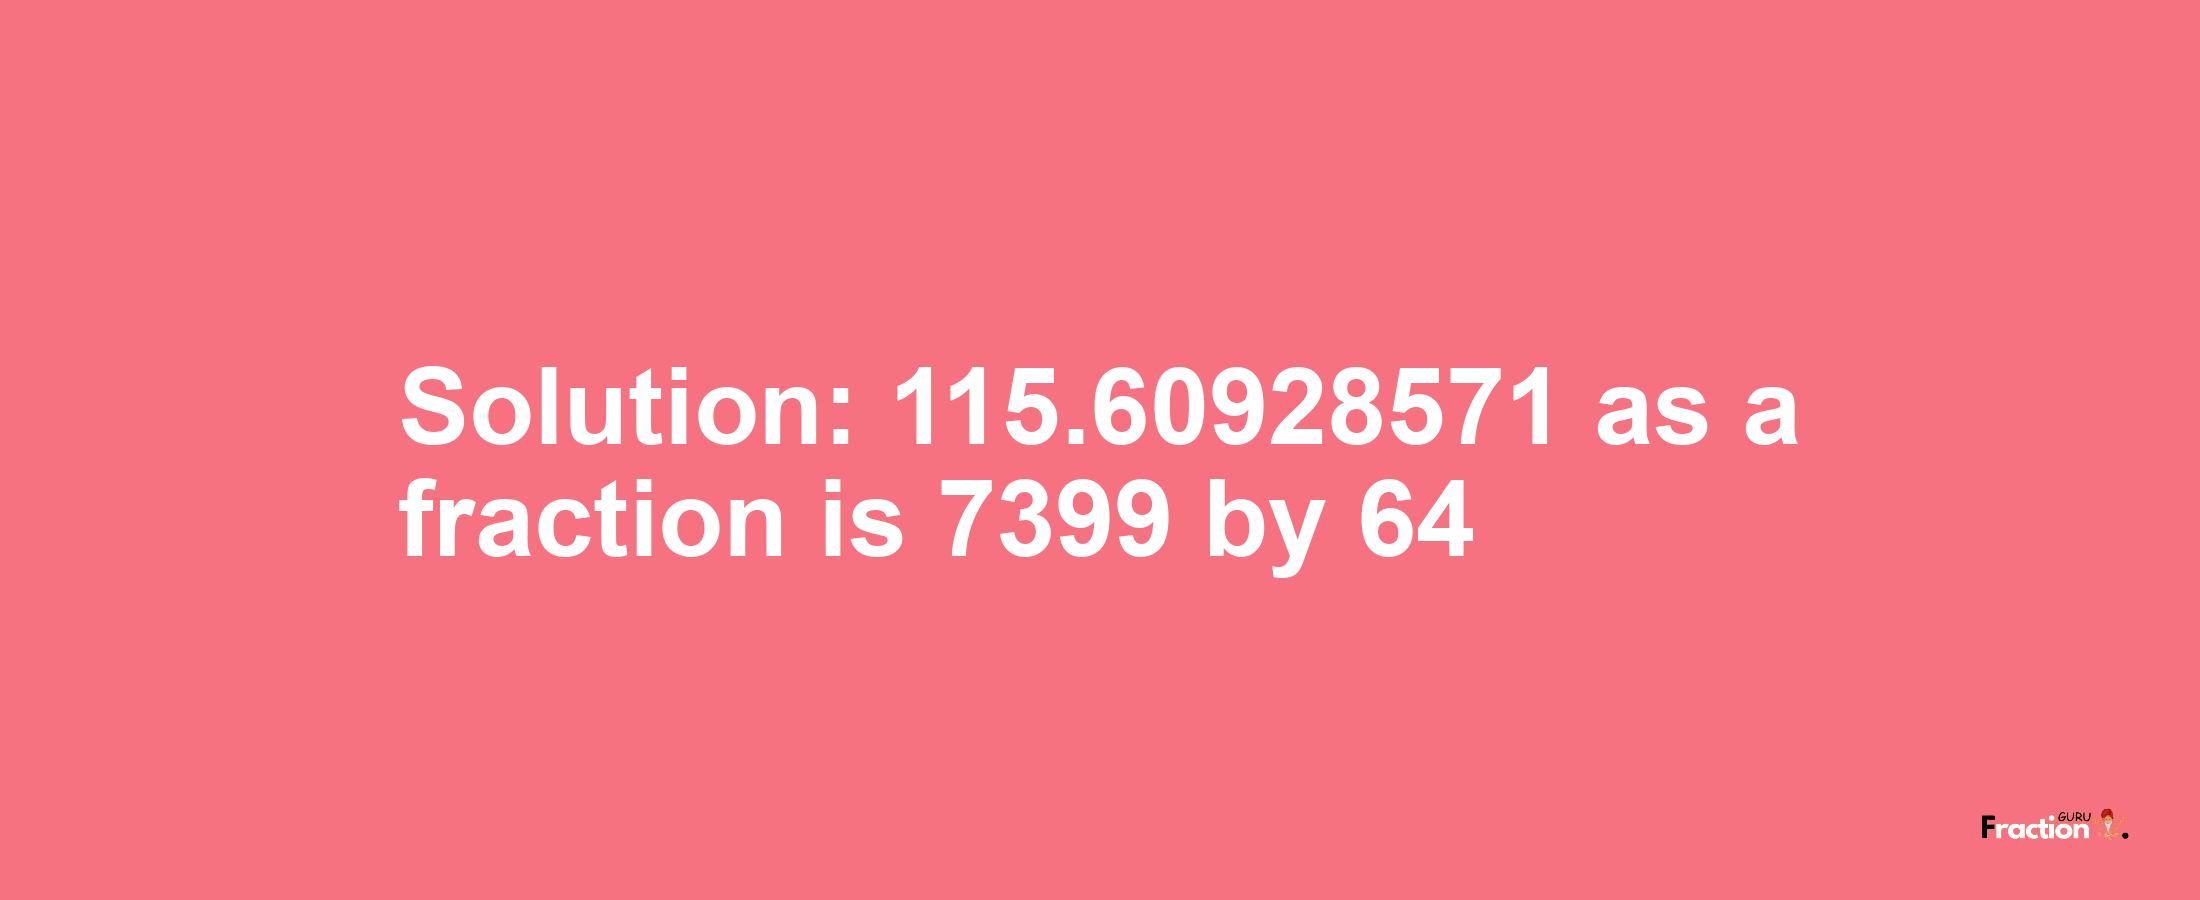 Solution:115.60928571 as a fraction is 7399/64